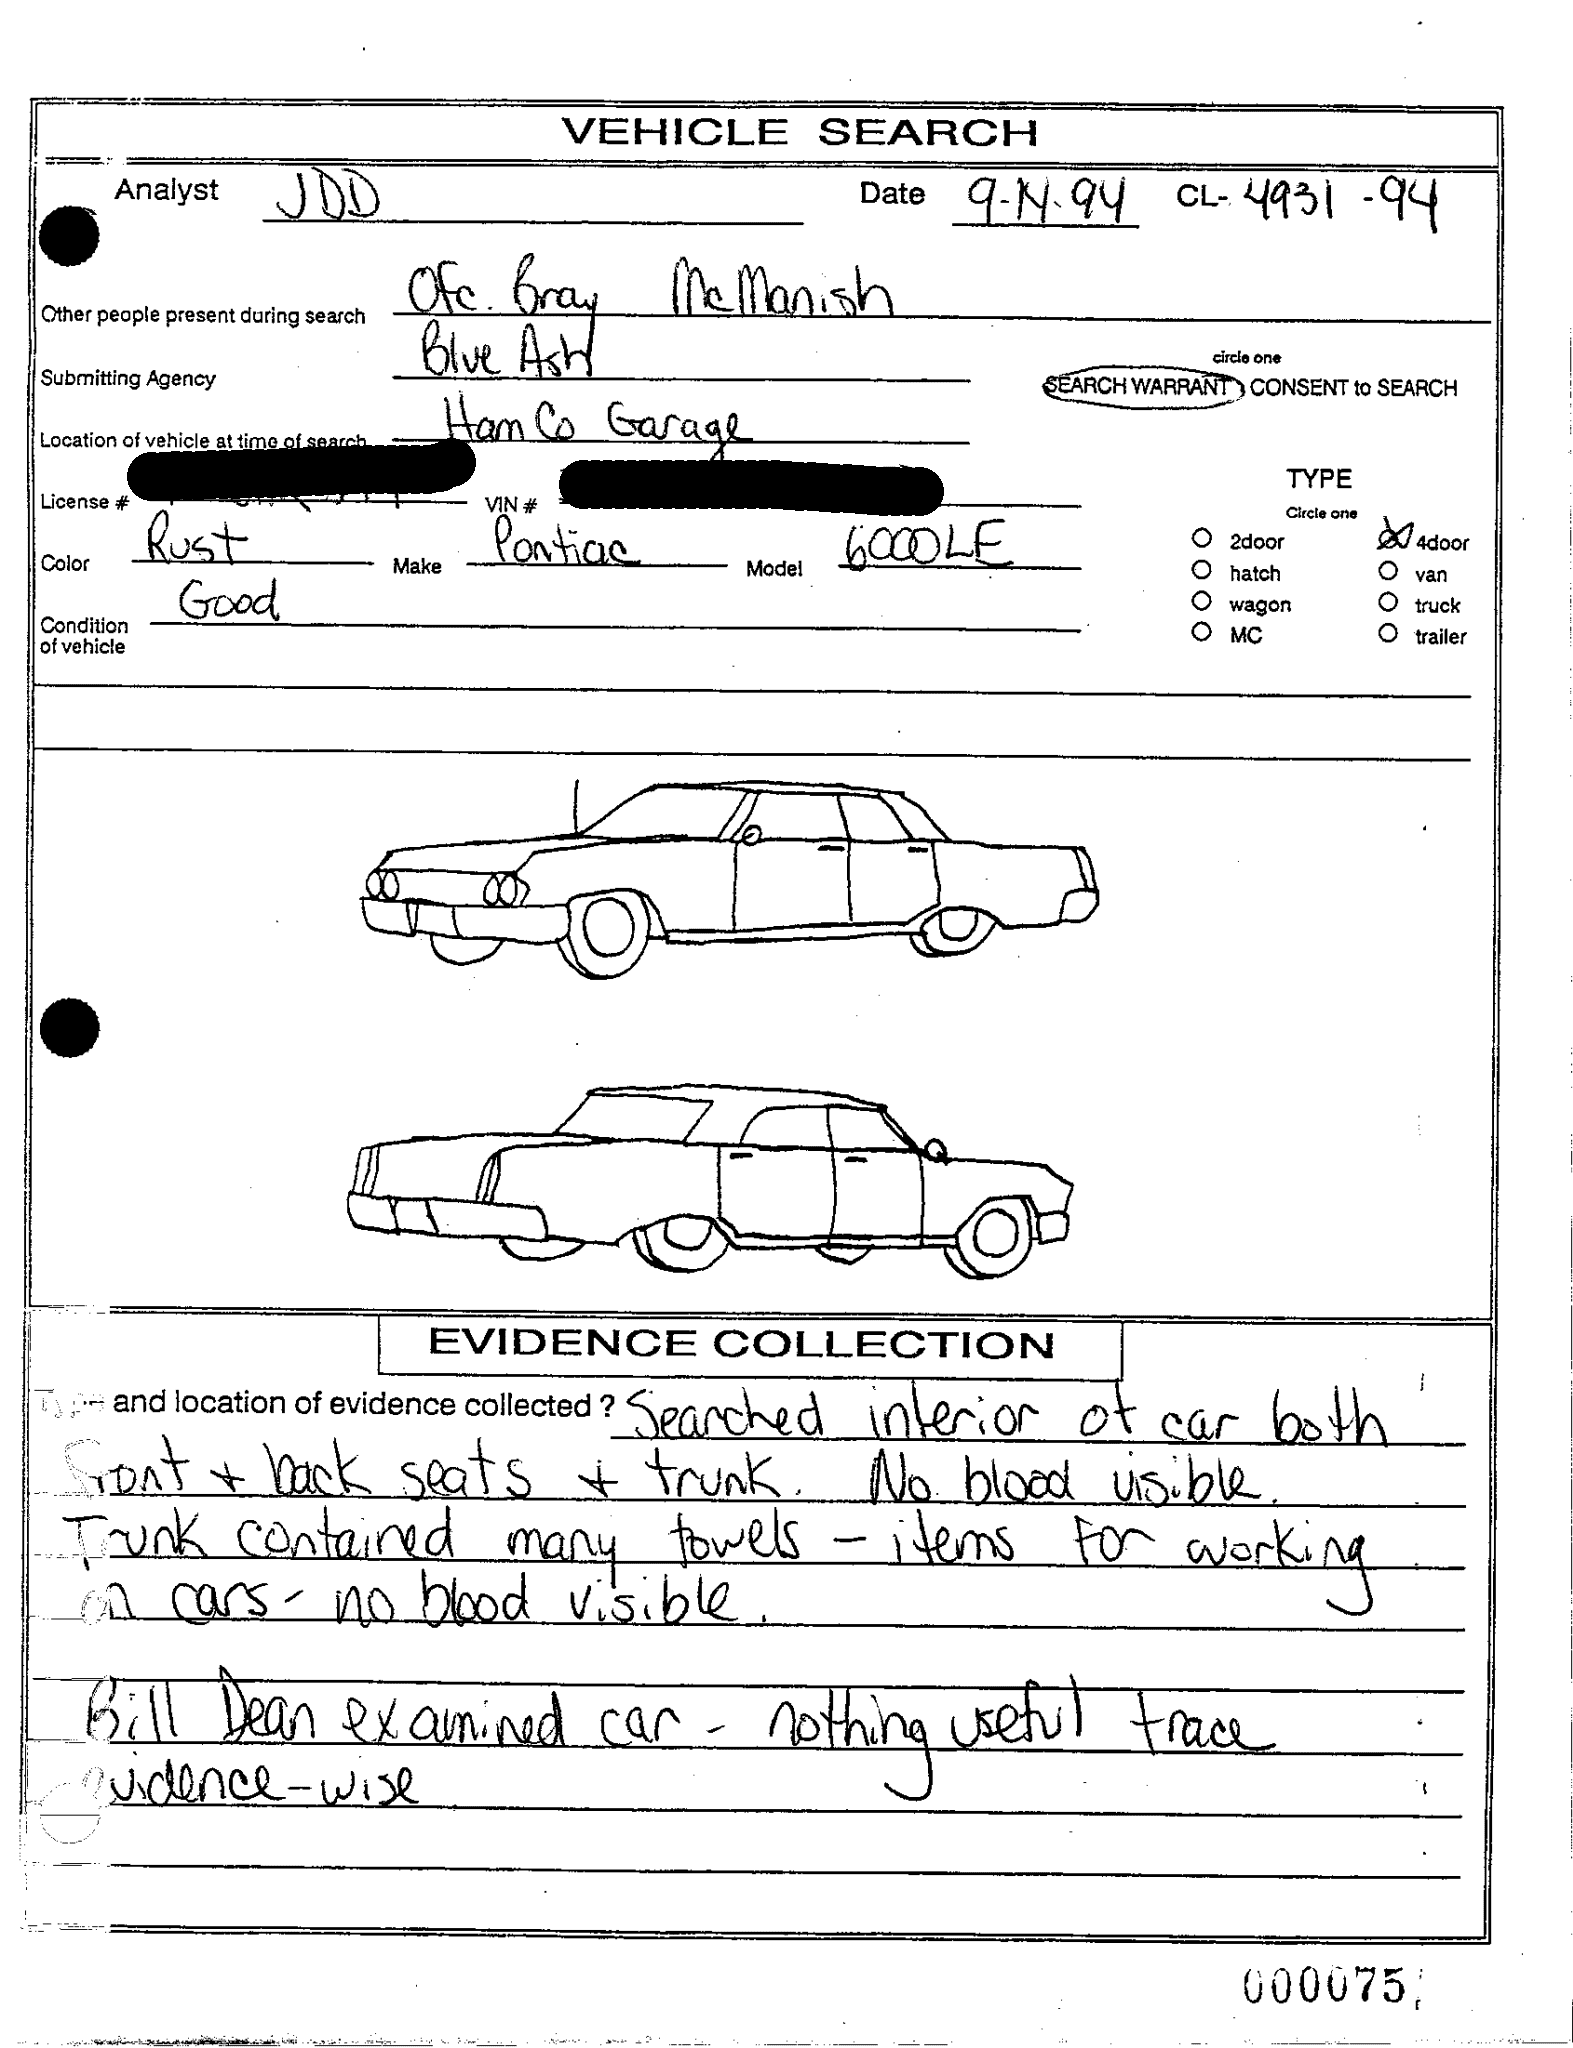 The vehicle search form inside of the police case file for when Elwood Jones’s vehicle was searched in relation to the 1994 homicide of Rhoda Nathan.